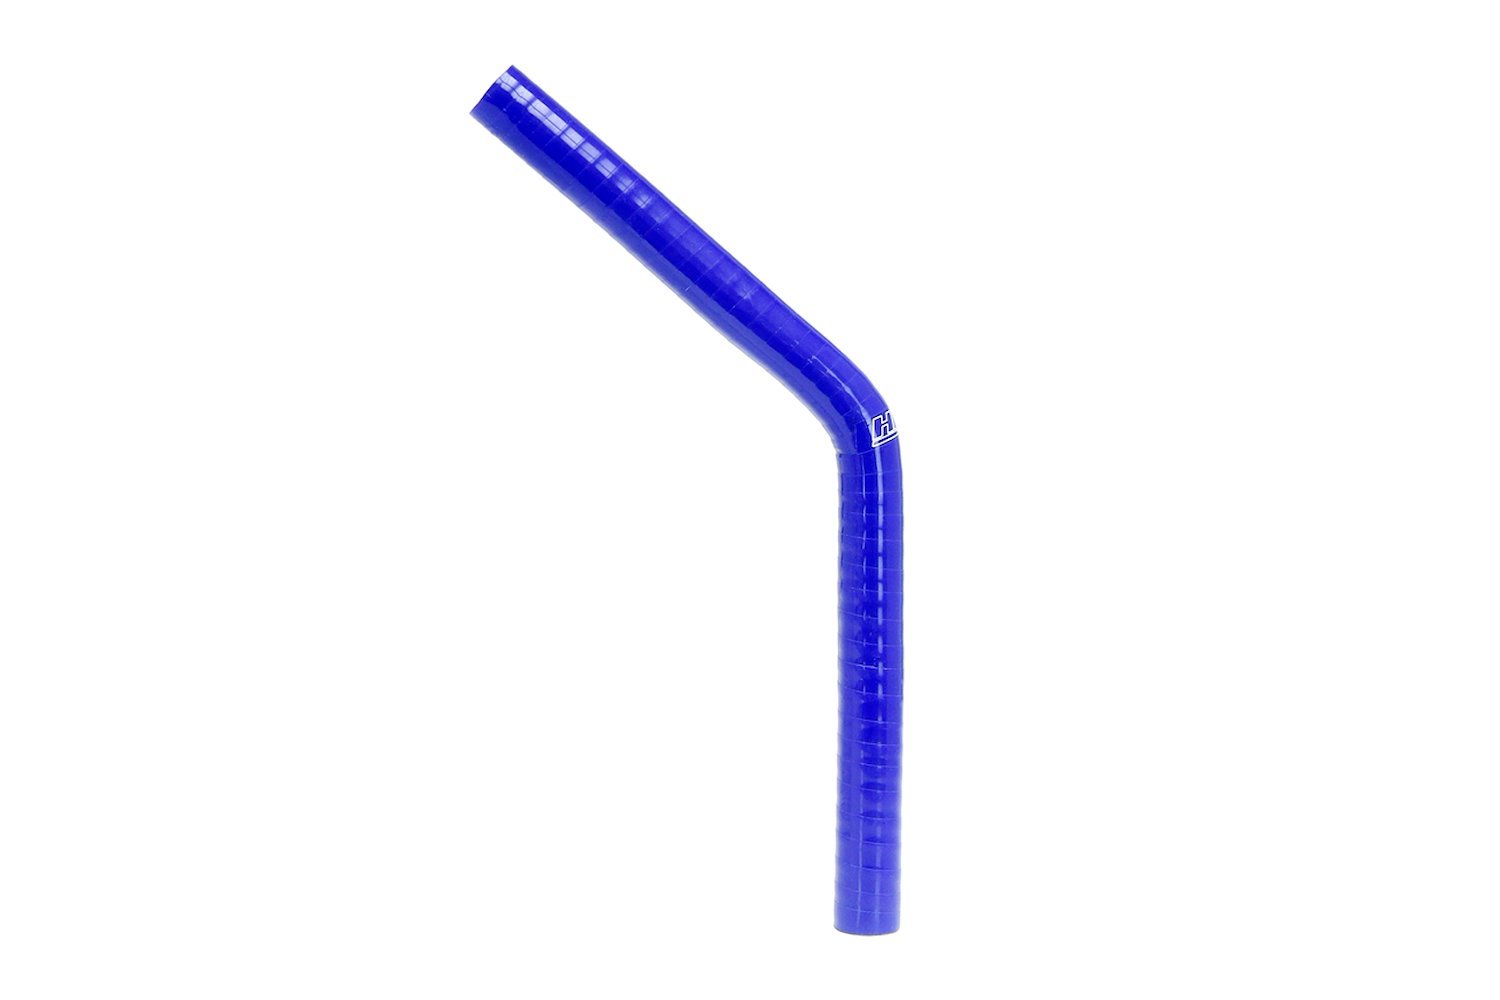 HTSEC45-118-BLUE Silicone 45-Degree Elbow Coupler Hose, High-Temp 4-Ply Reinforced, 1-3/16 in. ID, Blue